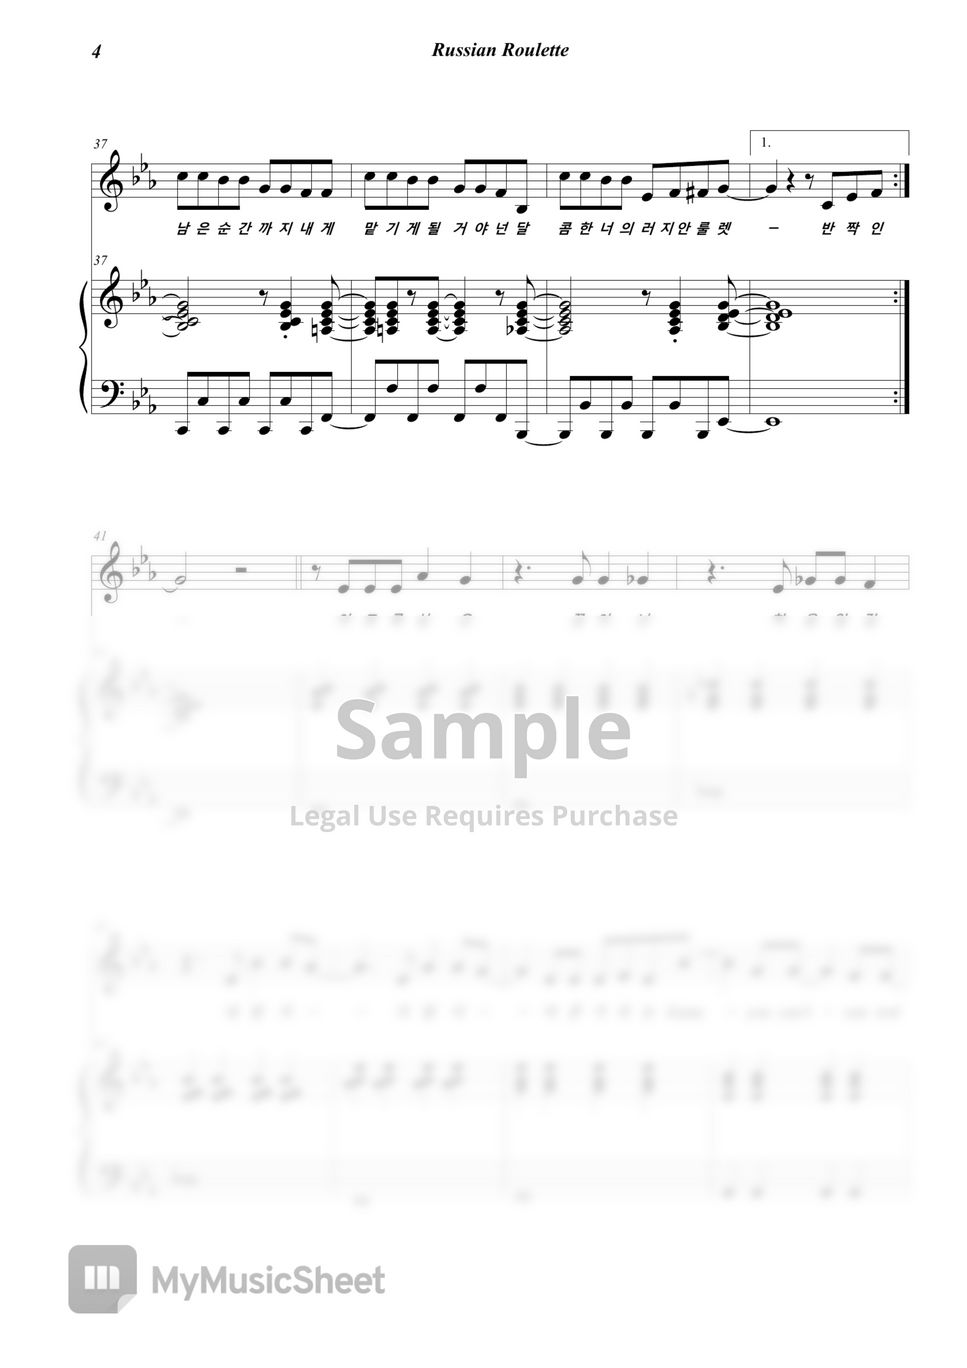 Red Velvet (레드벨벳) – Russian Roulette (piano tutorial) synthesia acoustic  [Piano Sheet Music] 